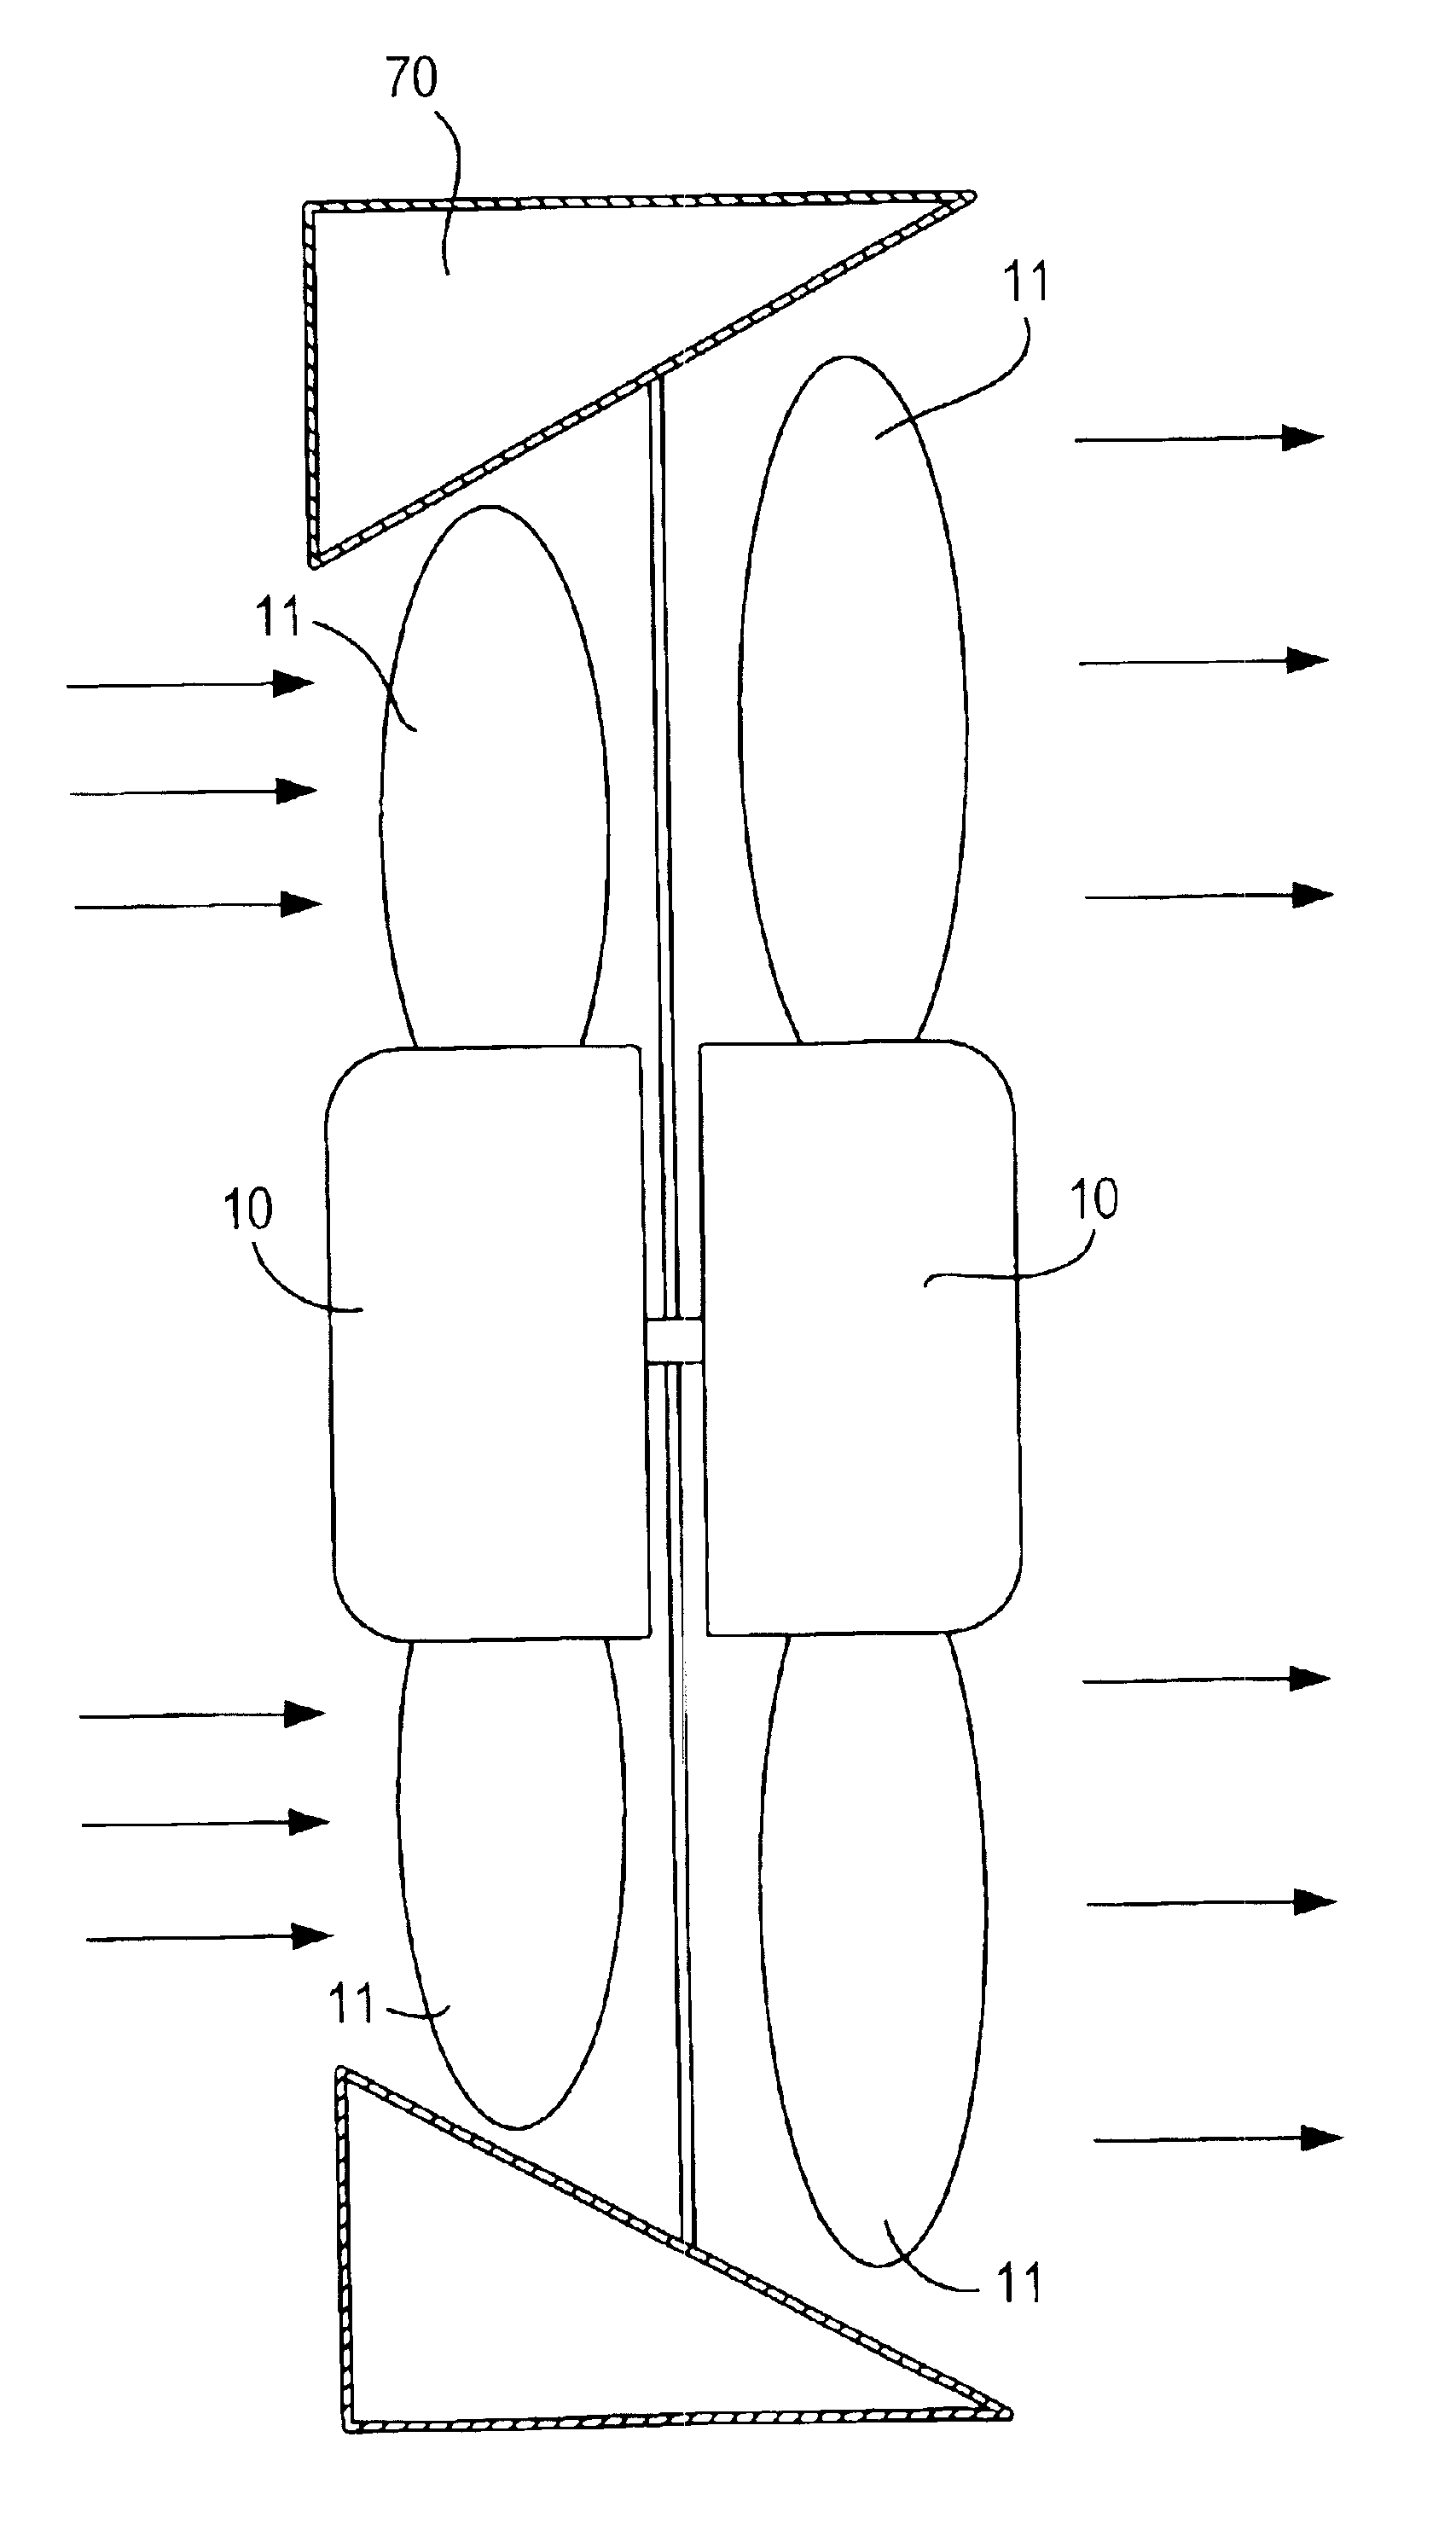 Impeller blade for axial flow fan having counter-rotating impellers